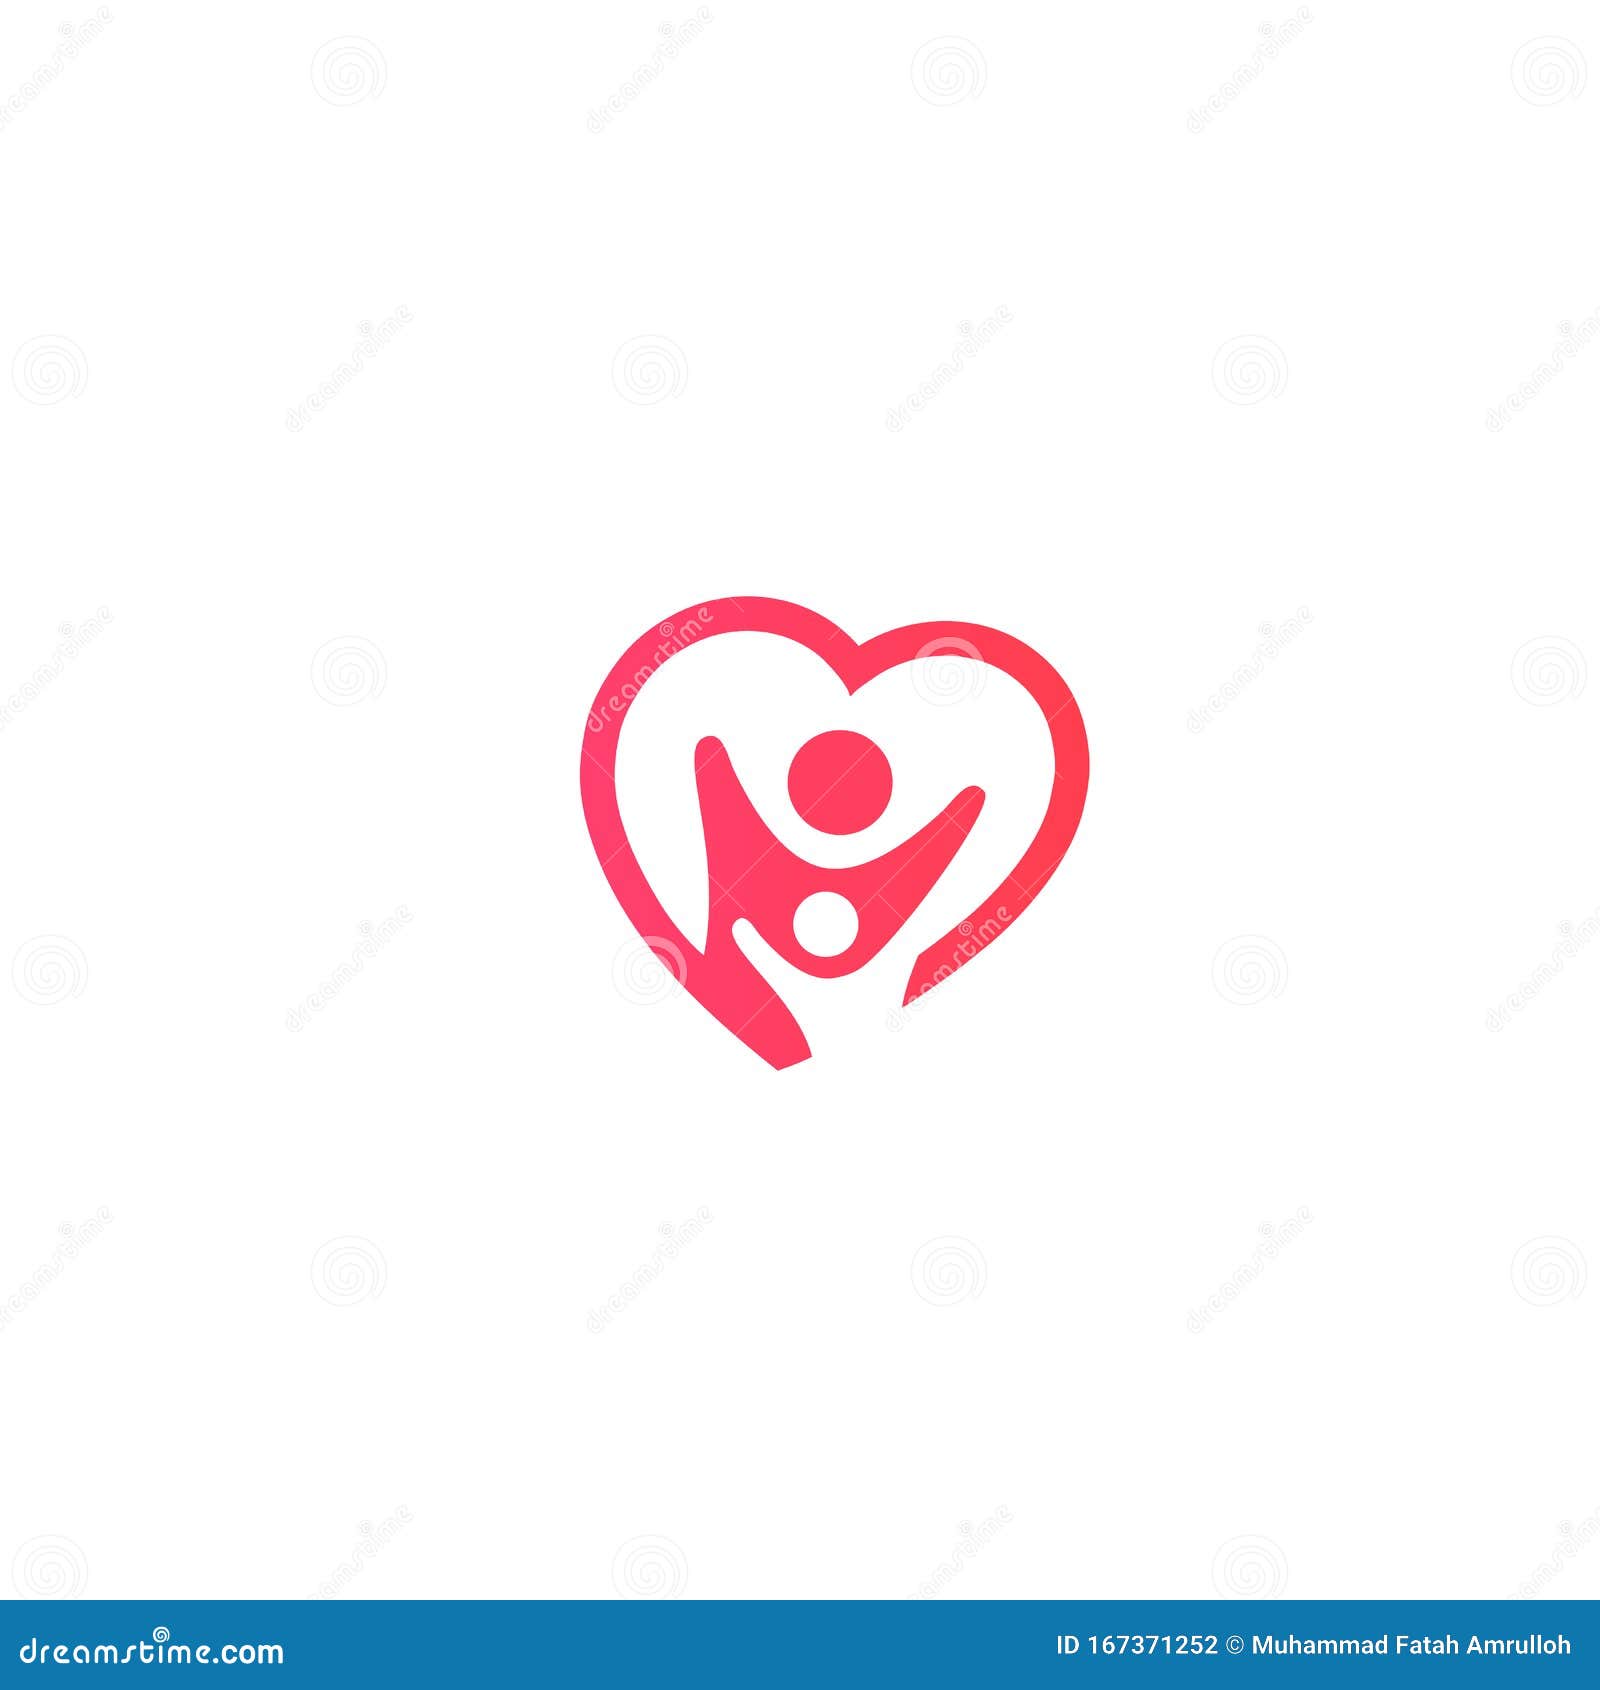 Child Care Logo Design Inspiration With Love Vector Stock Vector Illustration Of Insurance Element 167371252